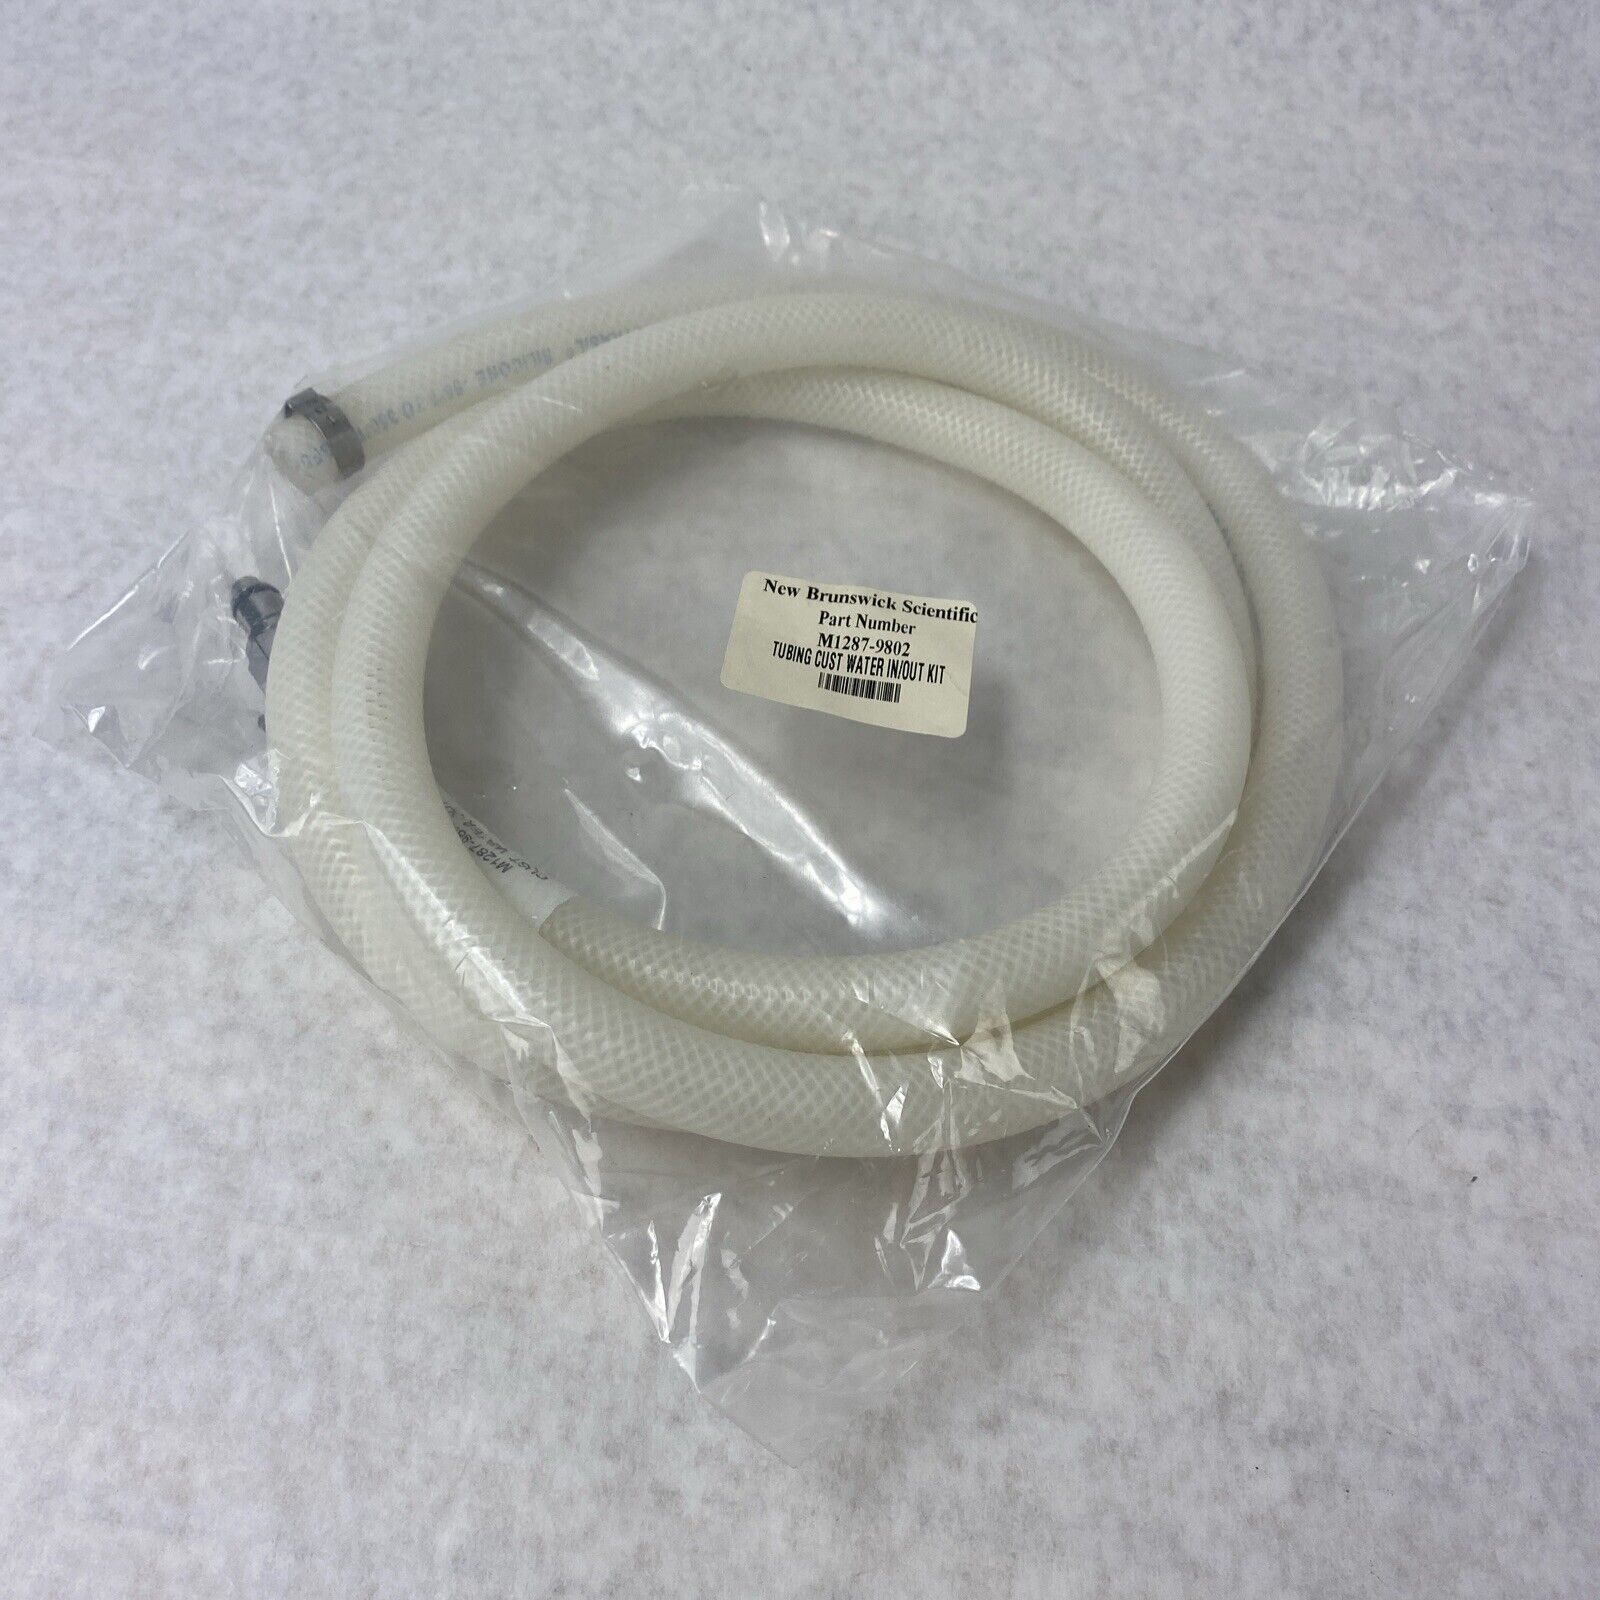 New Brunswick Scientific M1287-9802 Medical Tubing Cust Water In/Out Kit